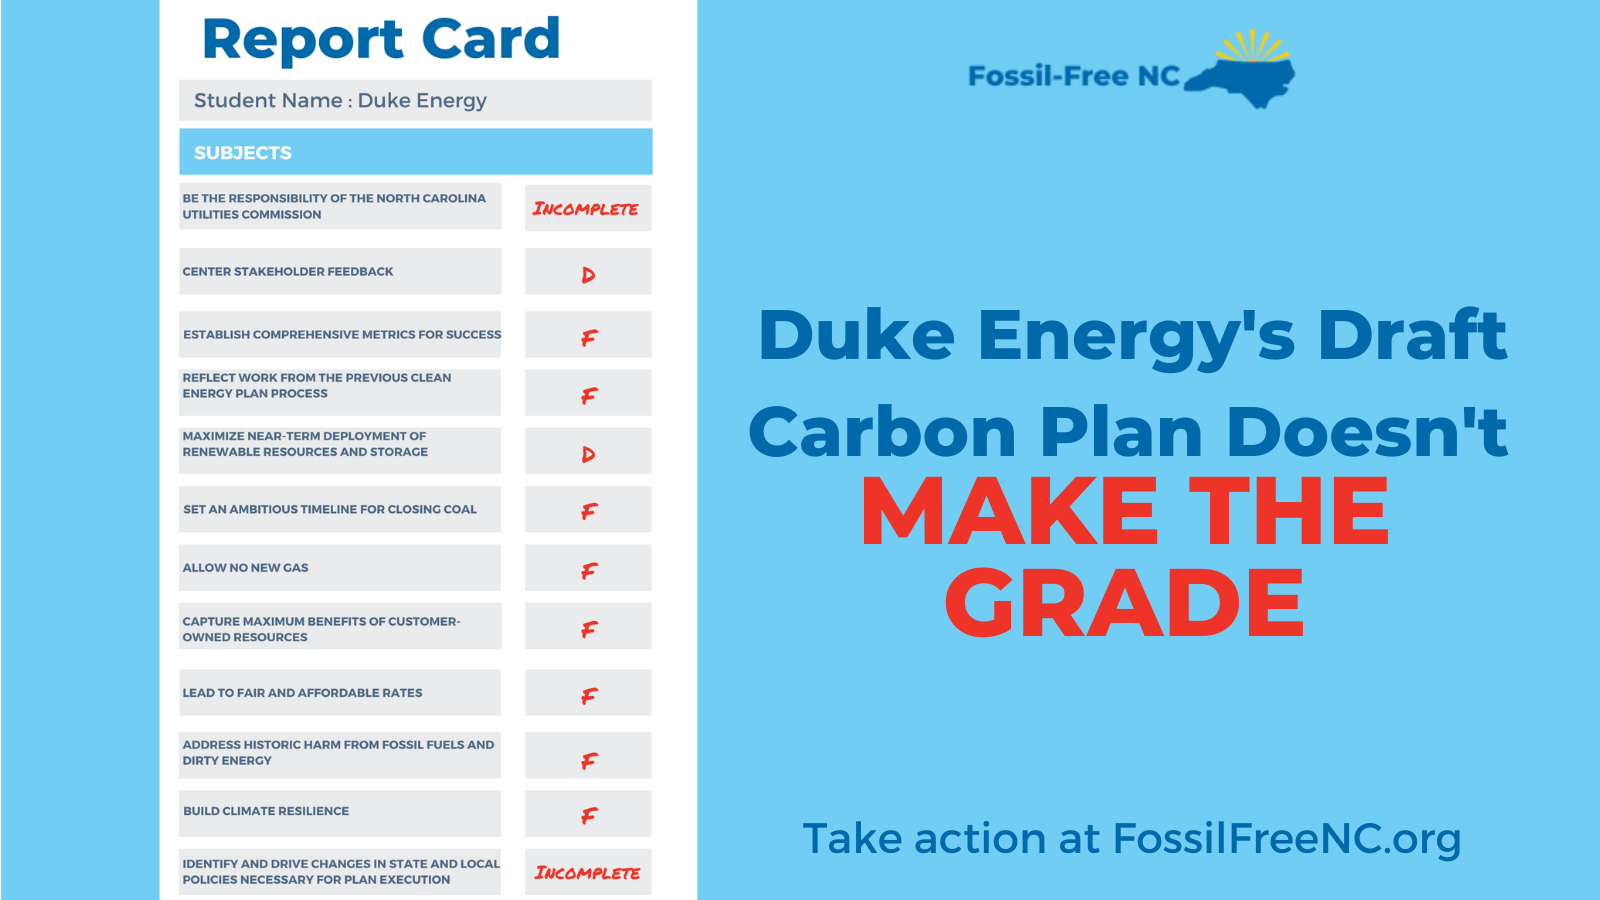 duke-energy-s-report-card-fossil-free-nc